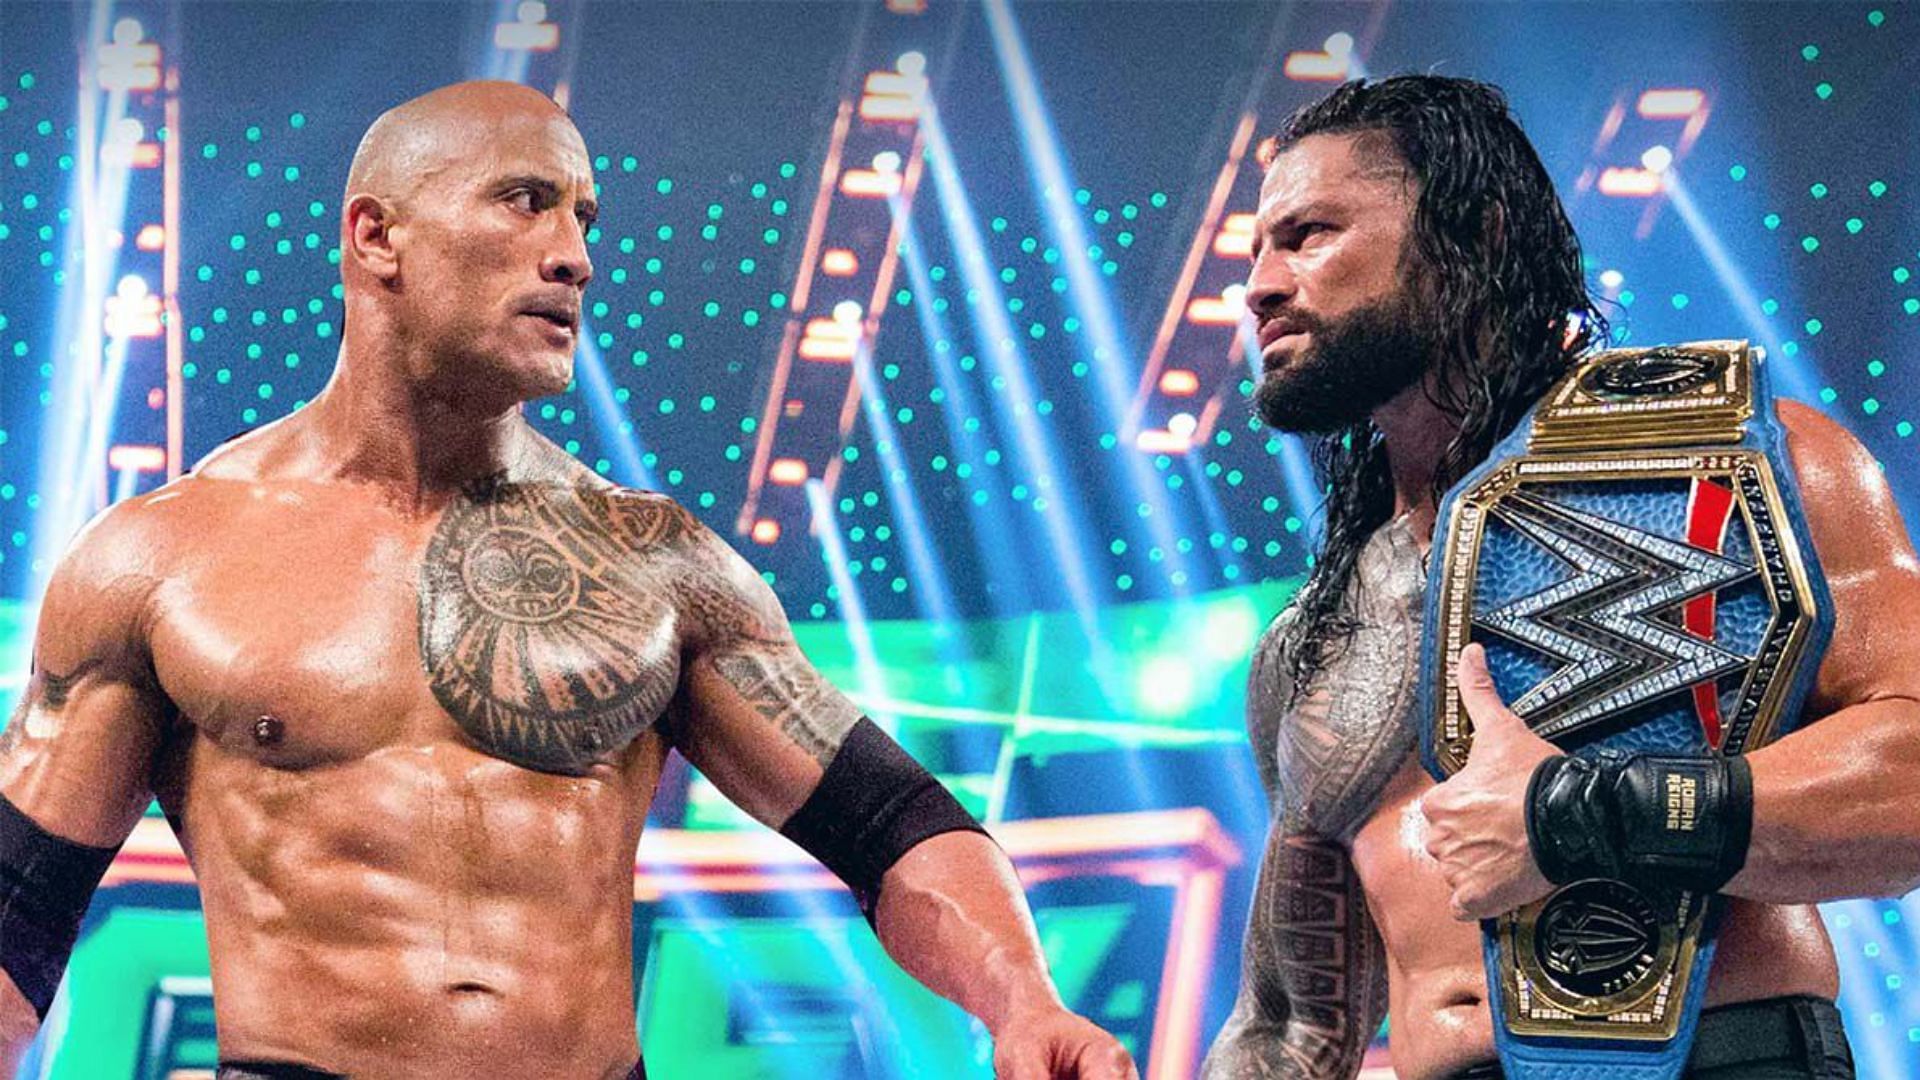 The Rock and Roman Reigns are real-life cousins